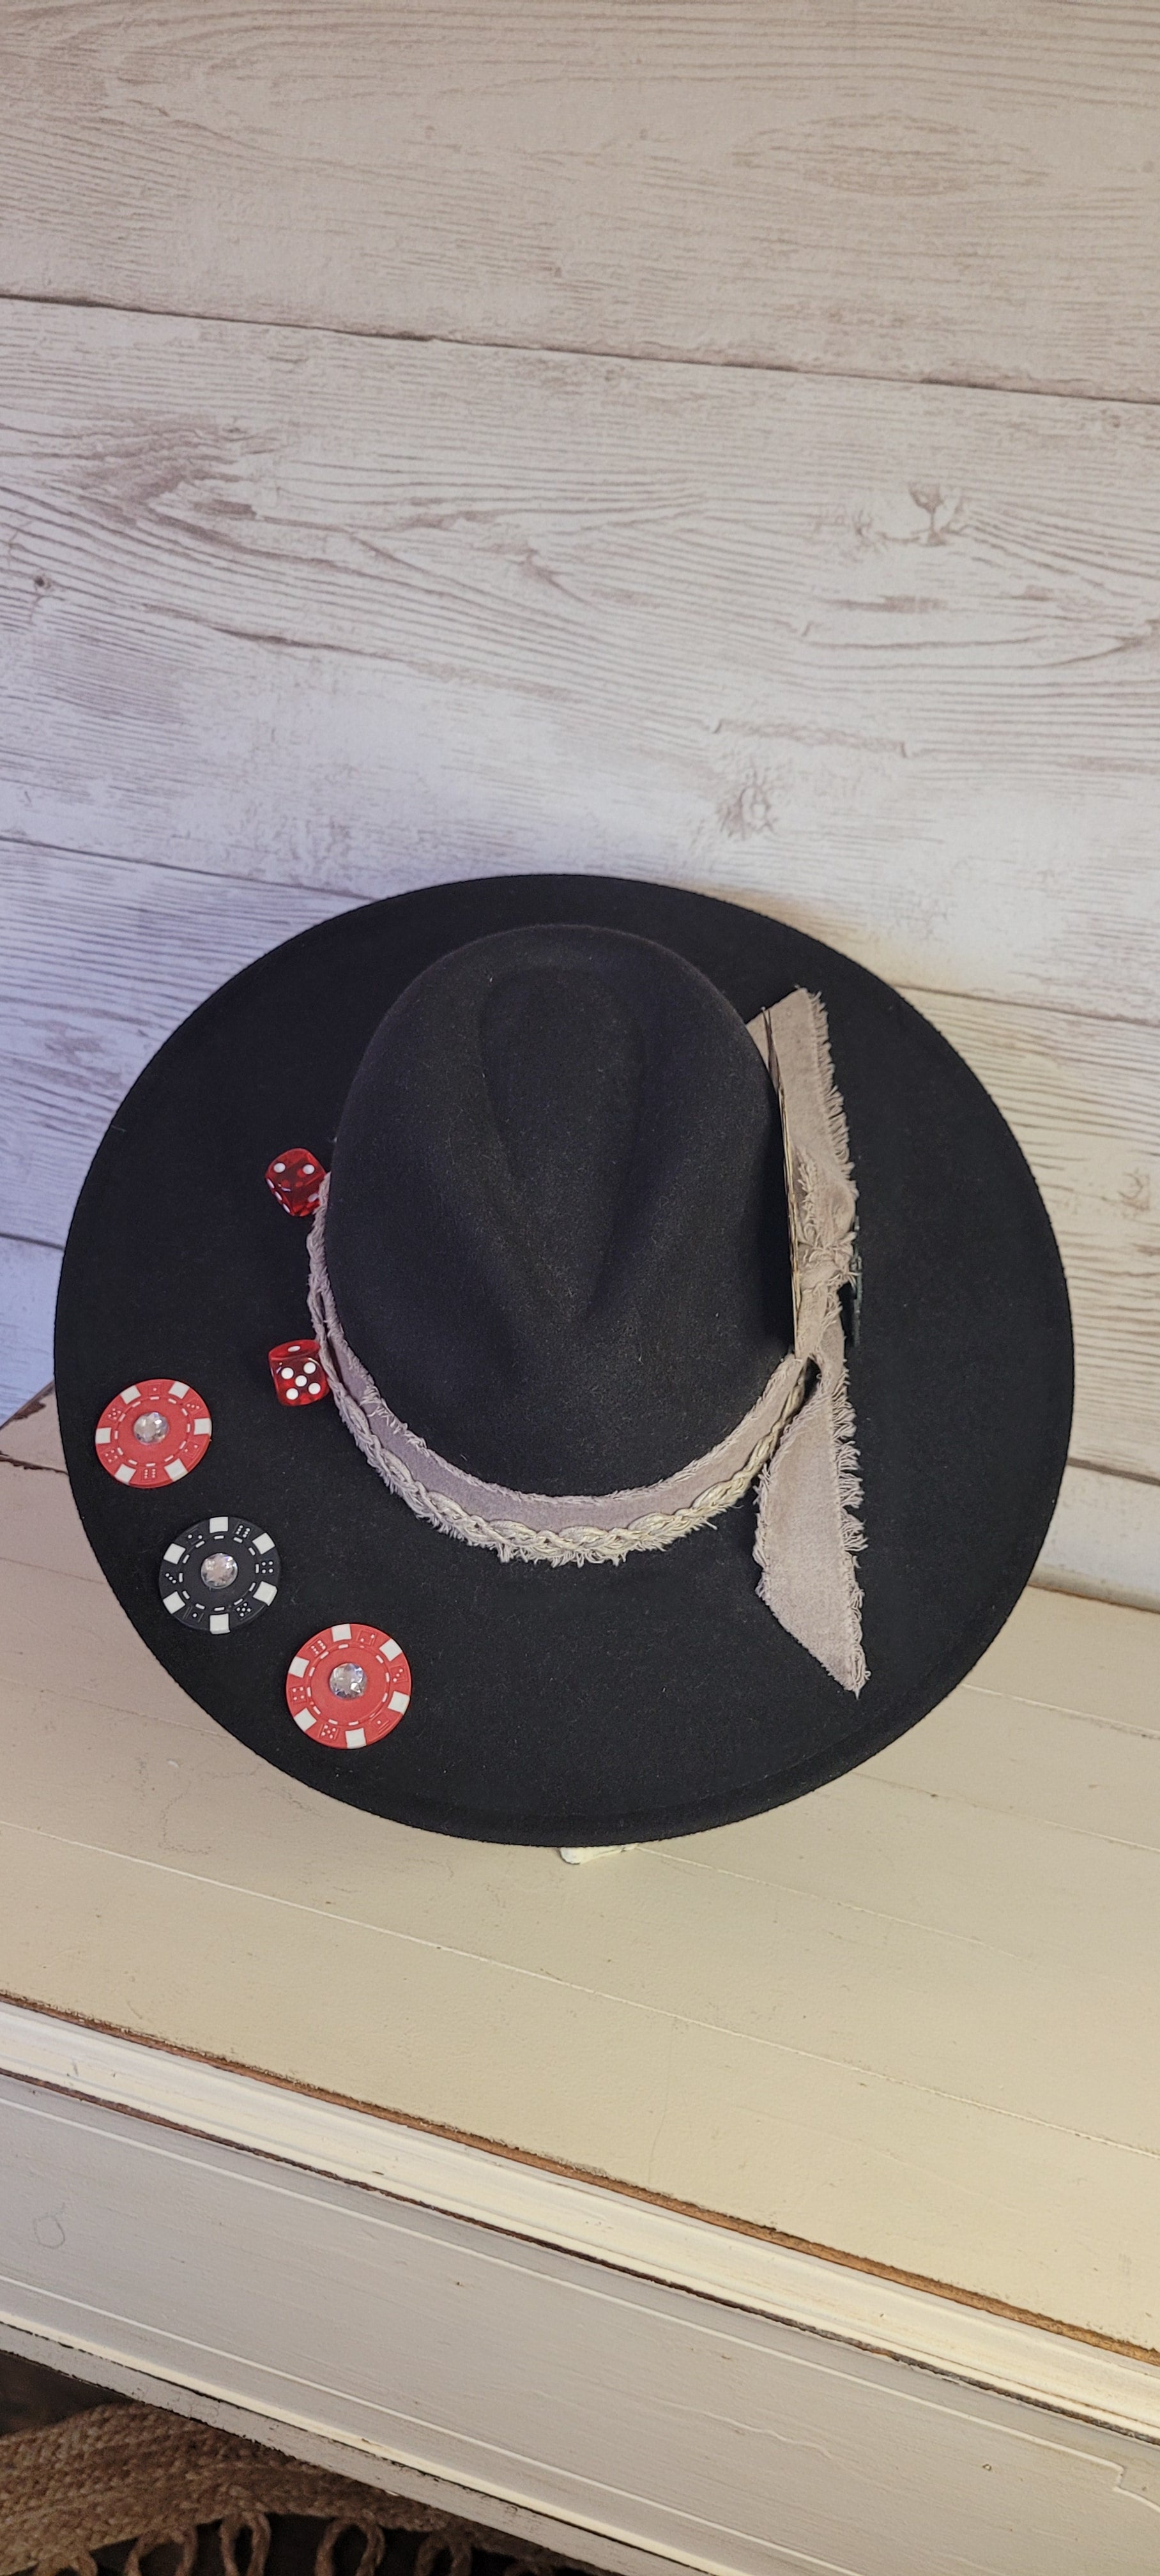 Features poker chips, dice, rhinestones, playing cards, natural frayed & lace ribbon, & metal horseshoe Felt hat Flat brim 35% cotton and 65% polyester Ribbon drawstring for hat size adjustment Head Circumference: 24" Crown Height: 5" Brim Length: 15.75" Brim Width: 14.5" Branded & numbered inside crown Custom designed by Kayla